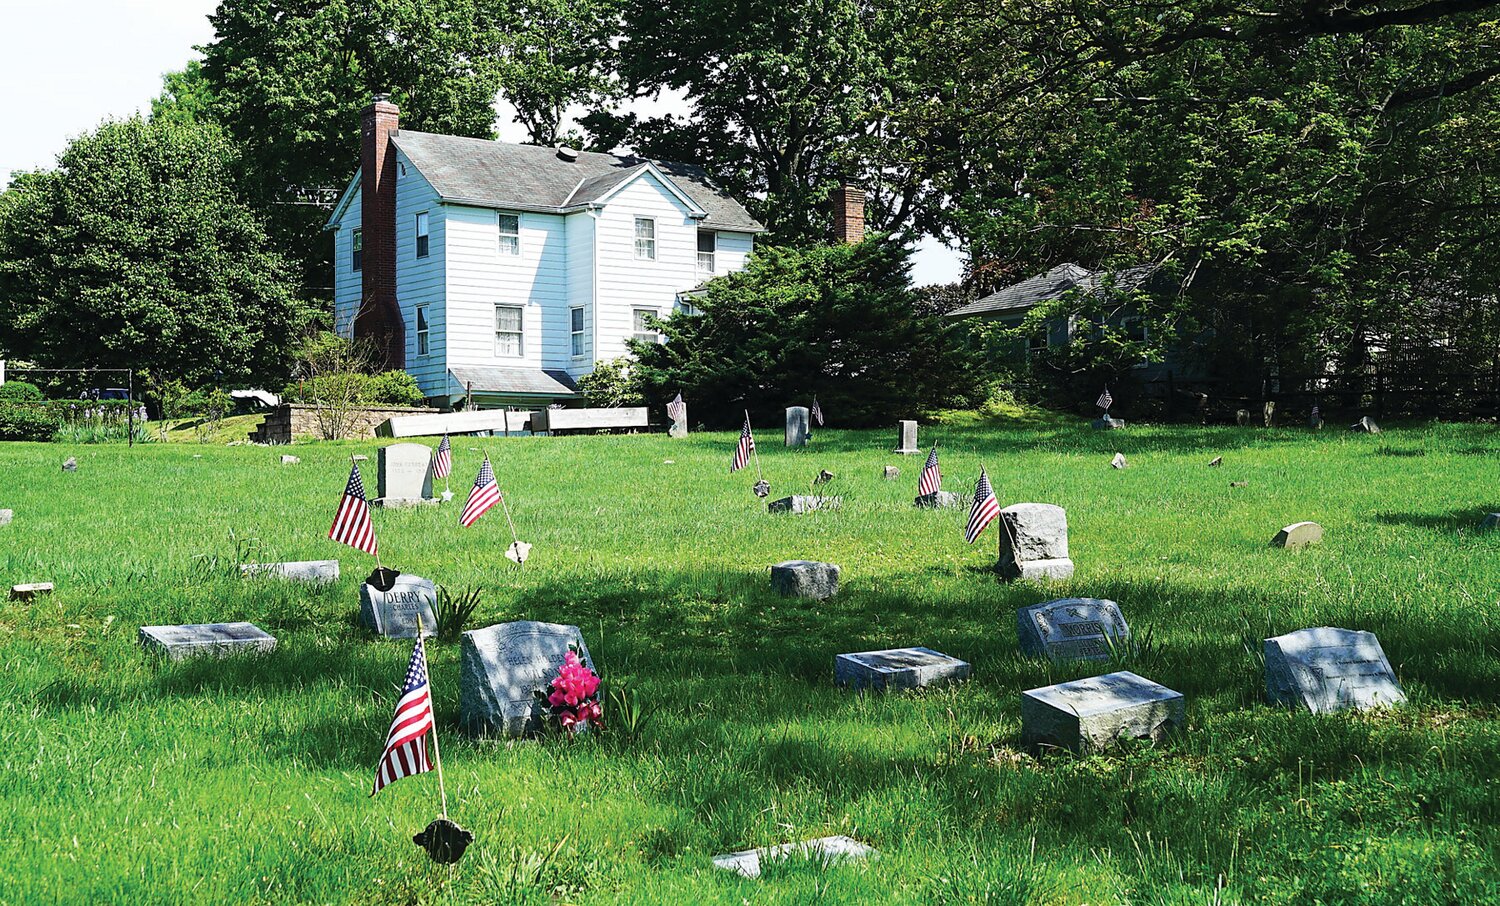 View of the Lighthouse Hill Cemetery, circa 2020. There are 12 African American Civil War veterans buried in the Lighthouse Hill Cemetery, where the vast majority of the graves of African Americans are unmarked.